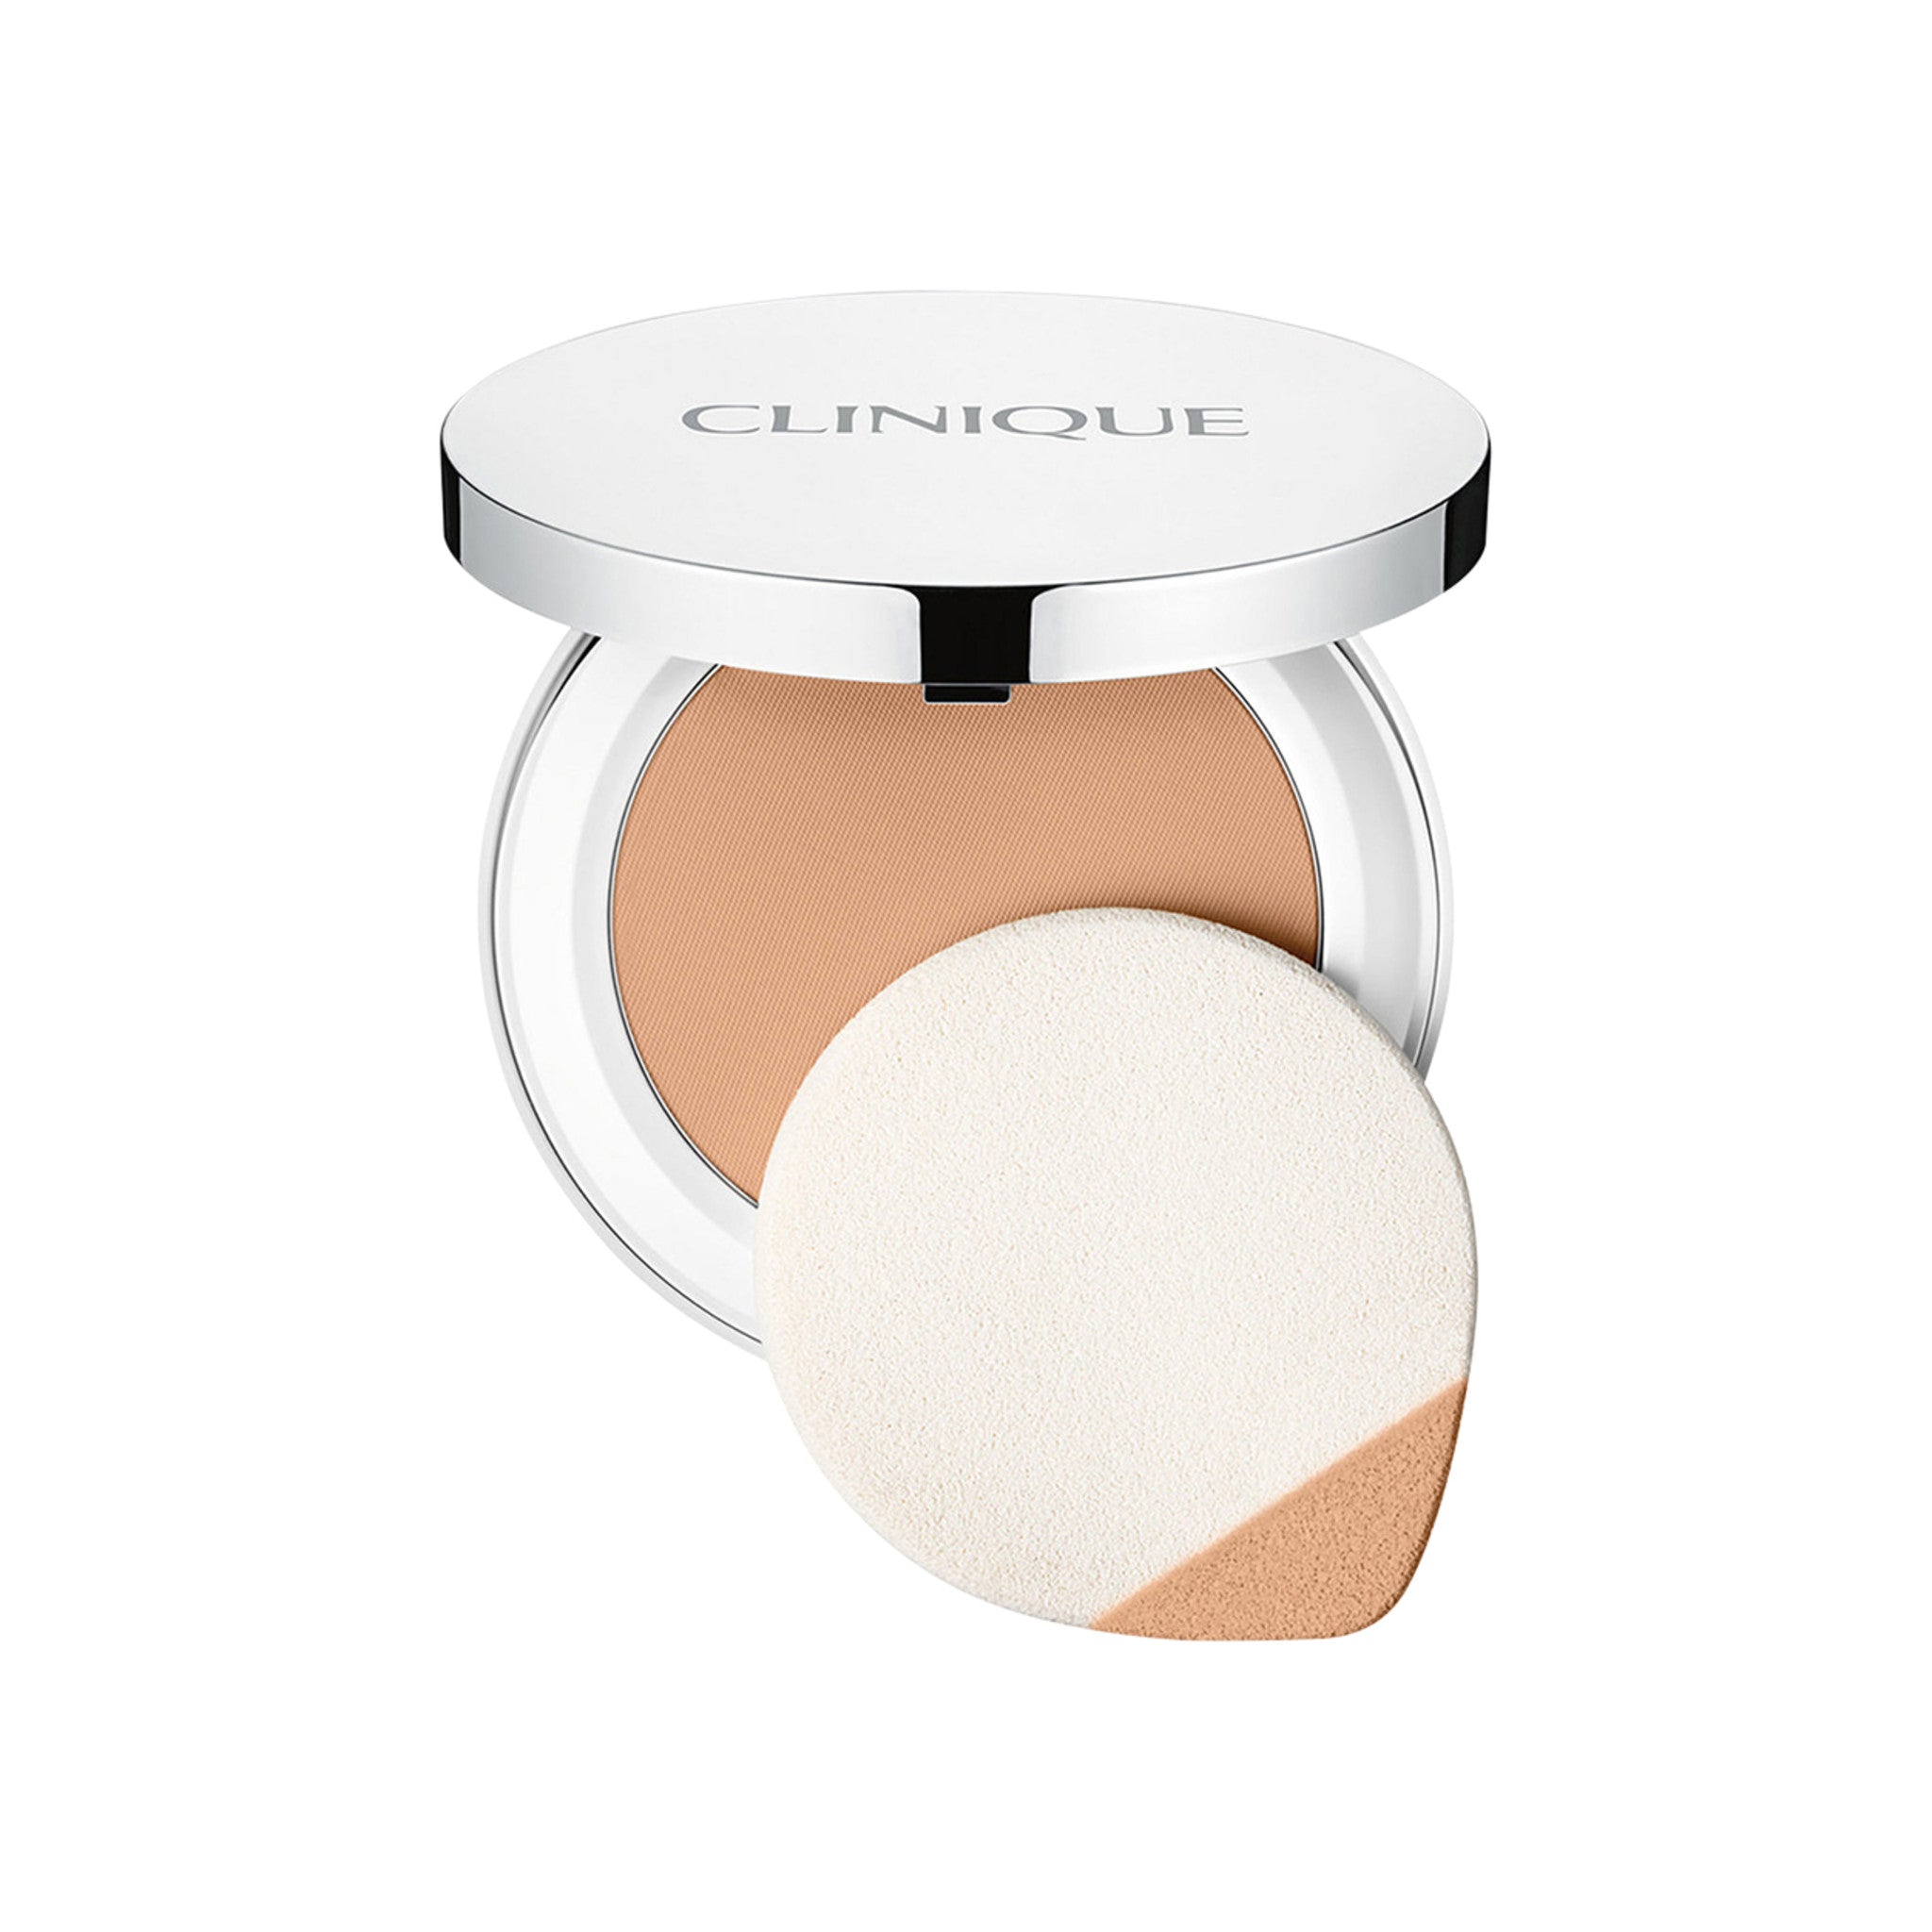 Clinique Beyond Perfecting Powder Foundation and Concealer Color/Shade variant: SAND main image.